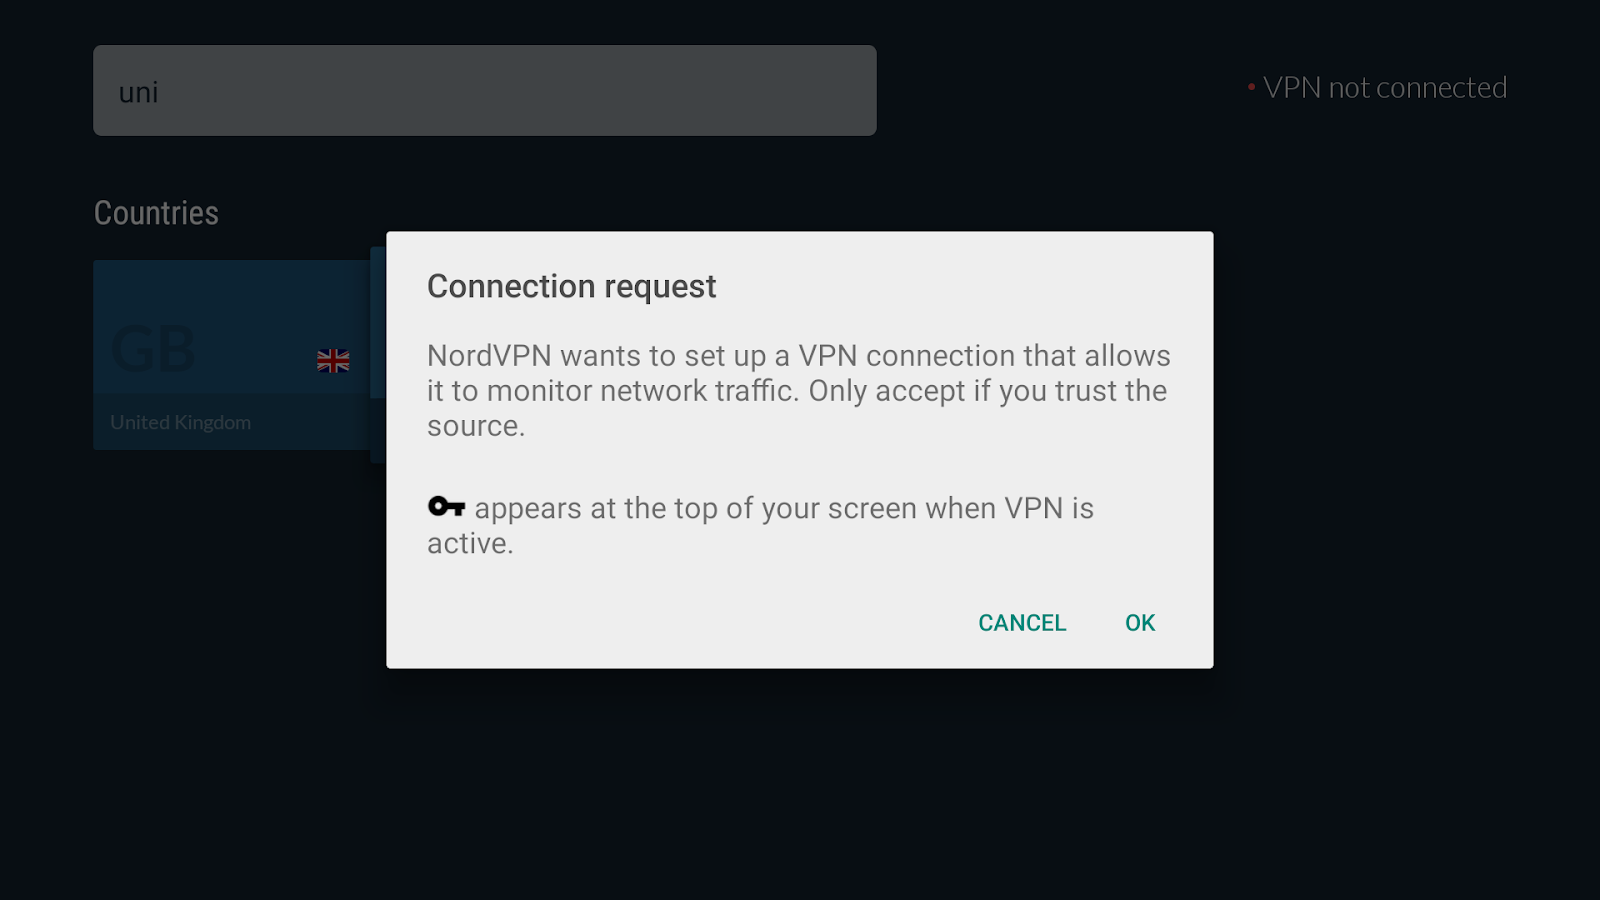 NordVPN connection request message on smart TV